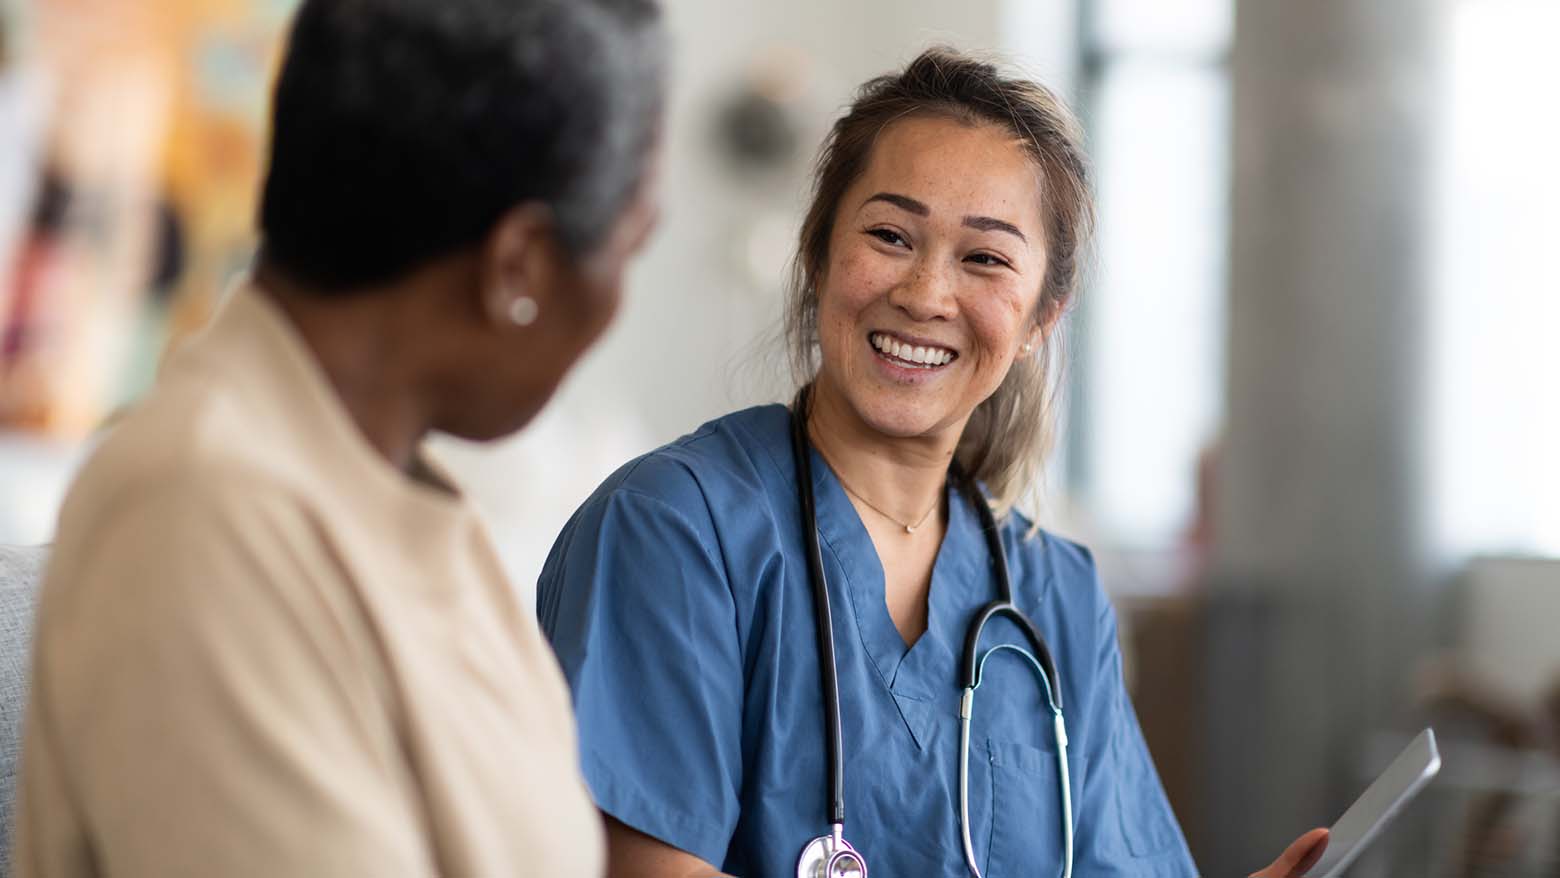 A female doctor smiles while talking to a patient